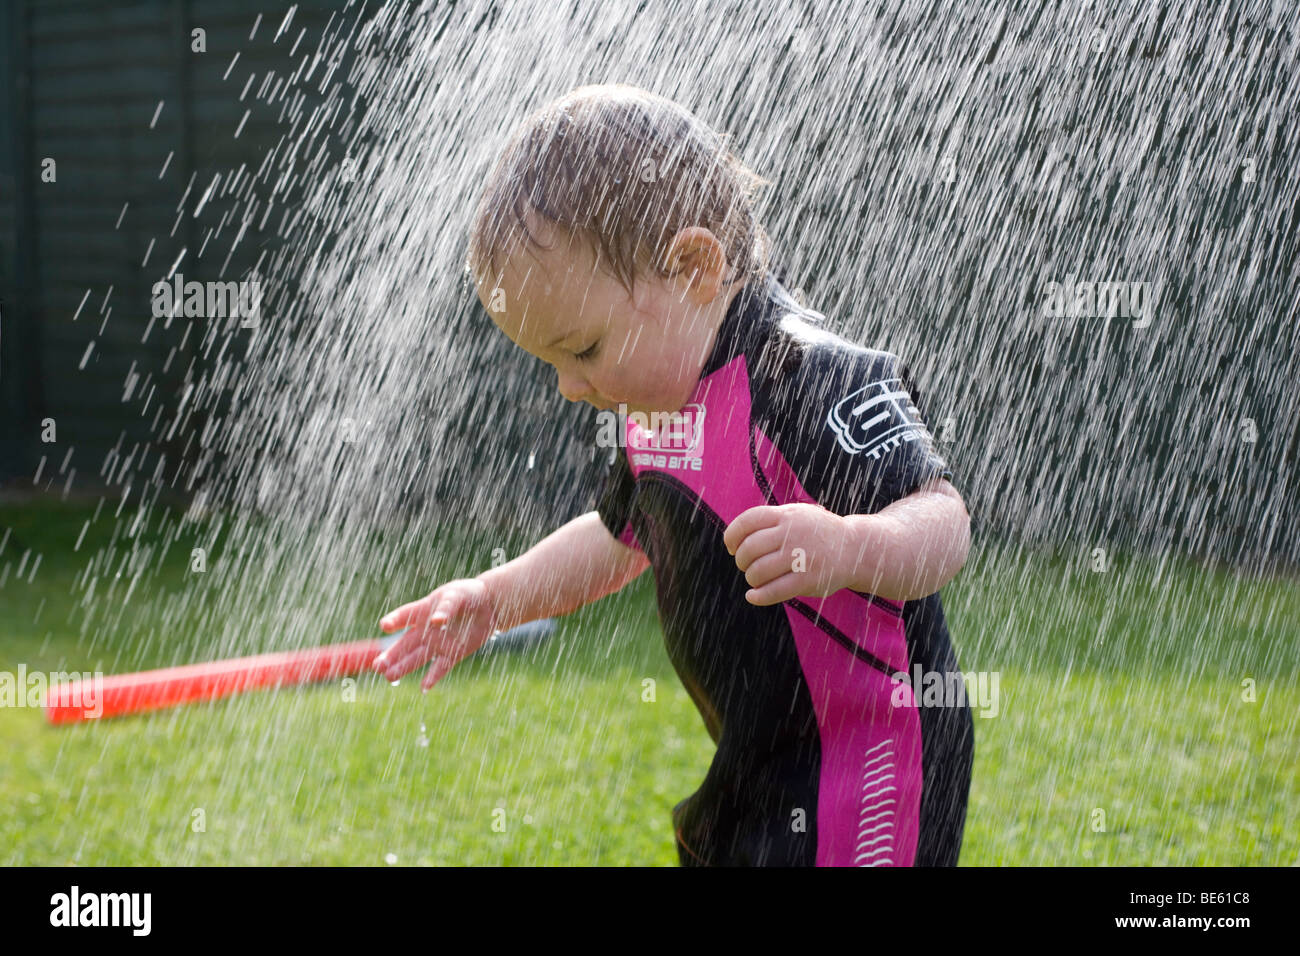 15 month old toddler in wetsuit under water spray Stock Photo